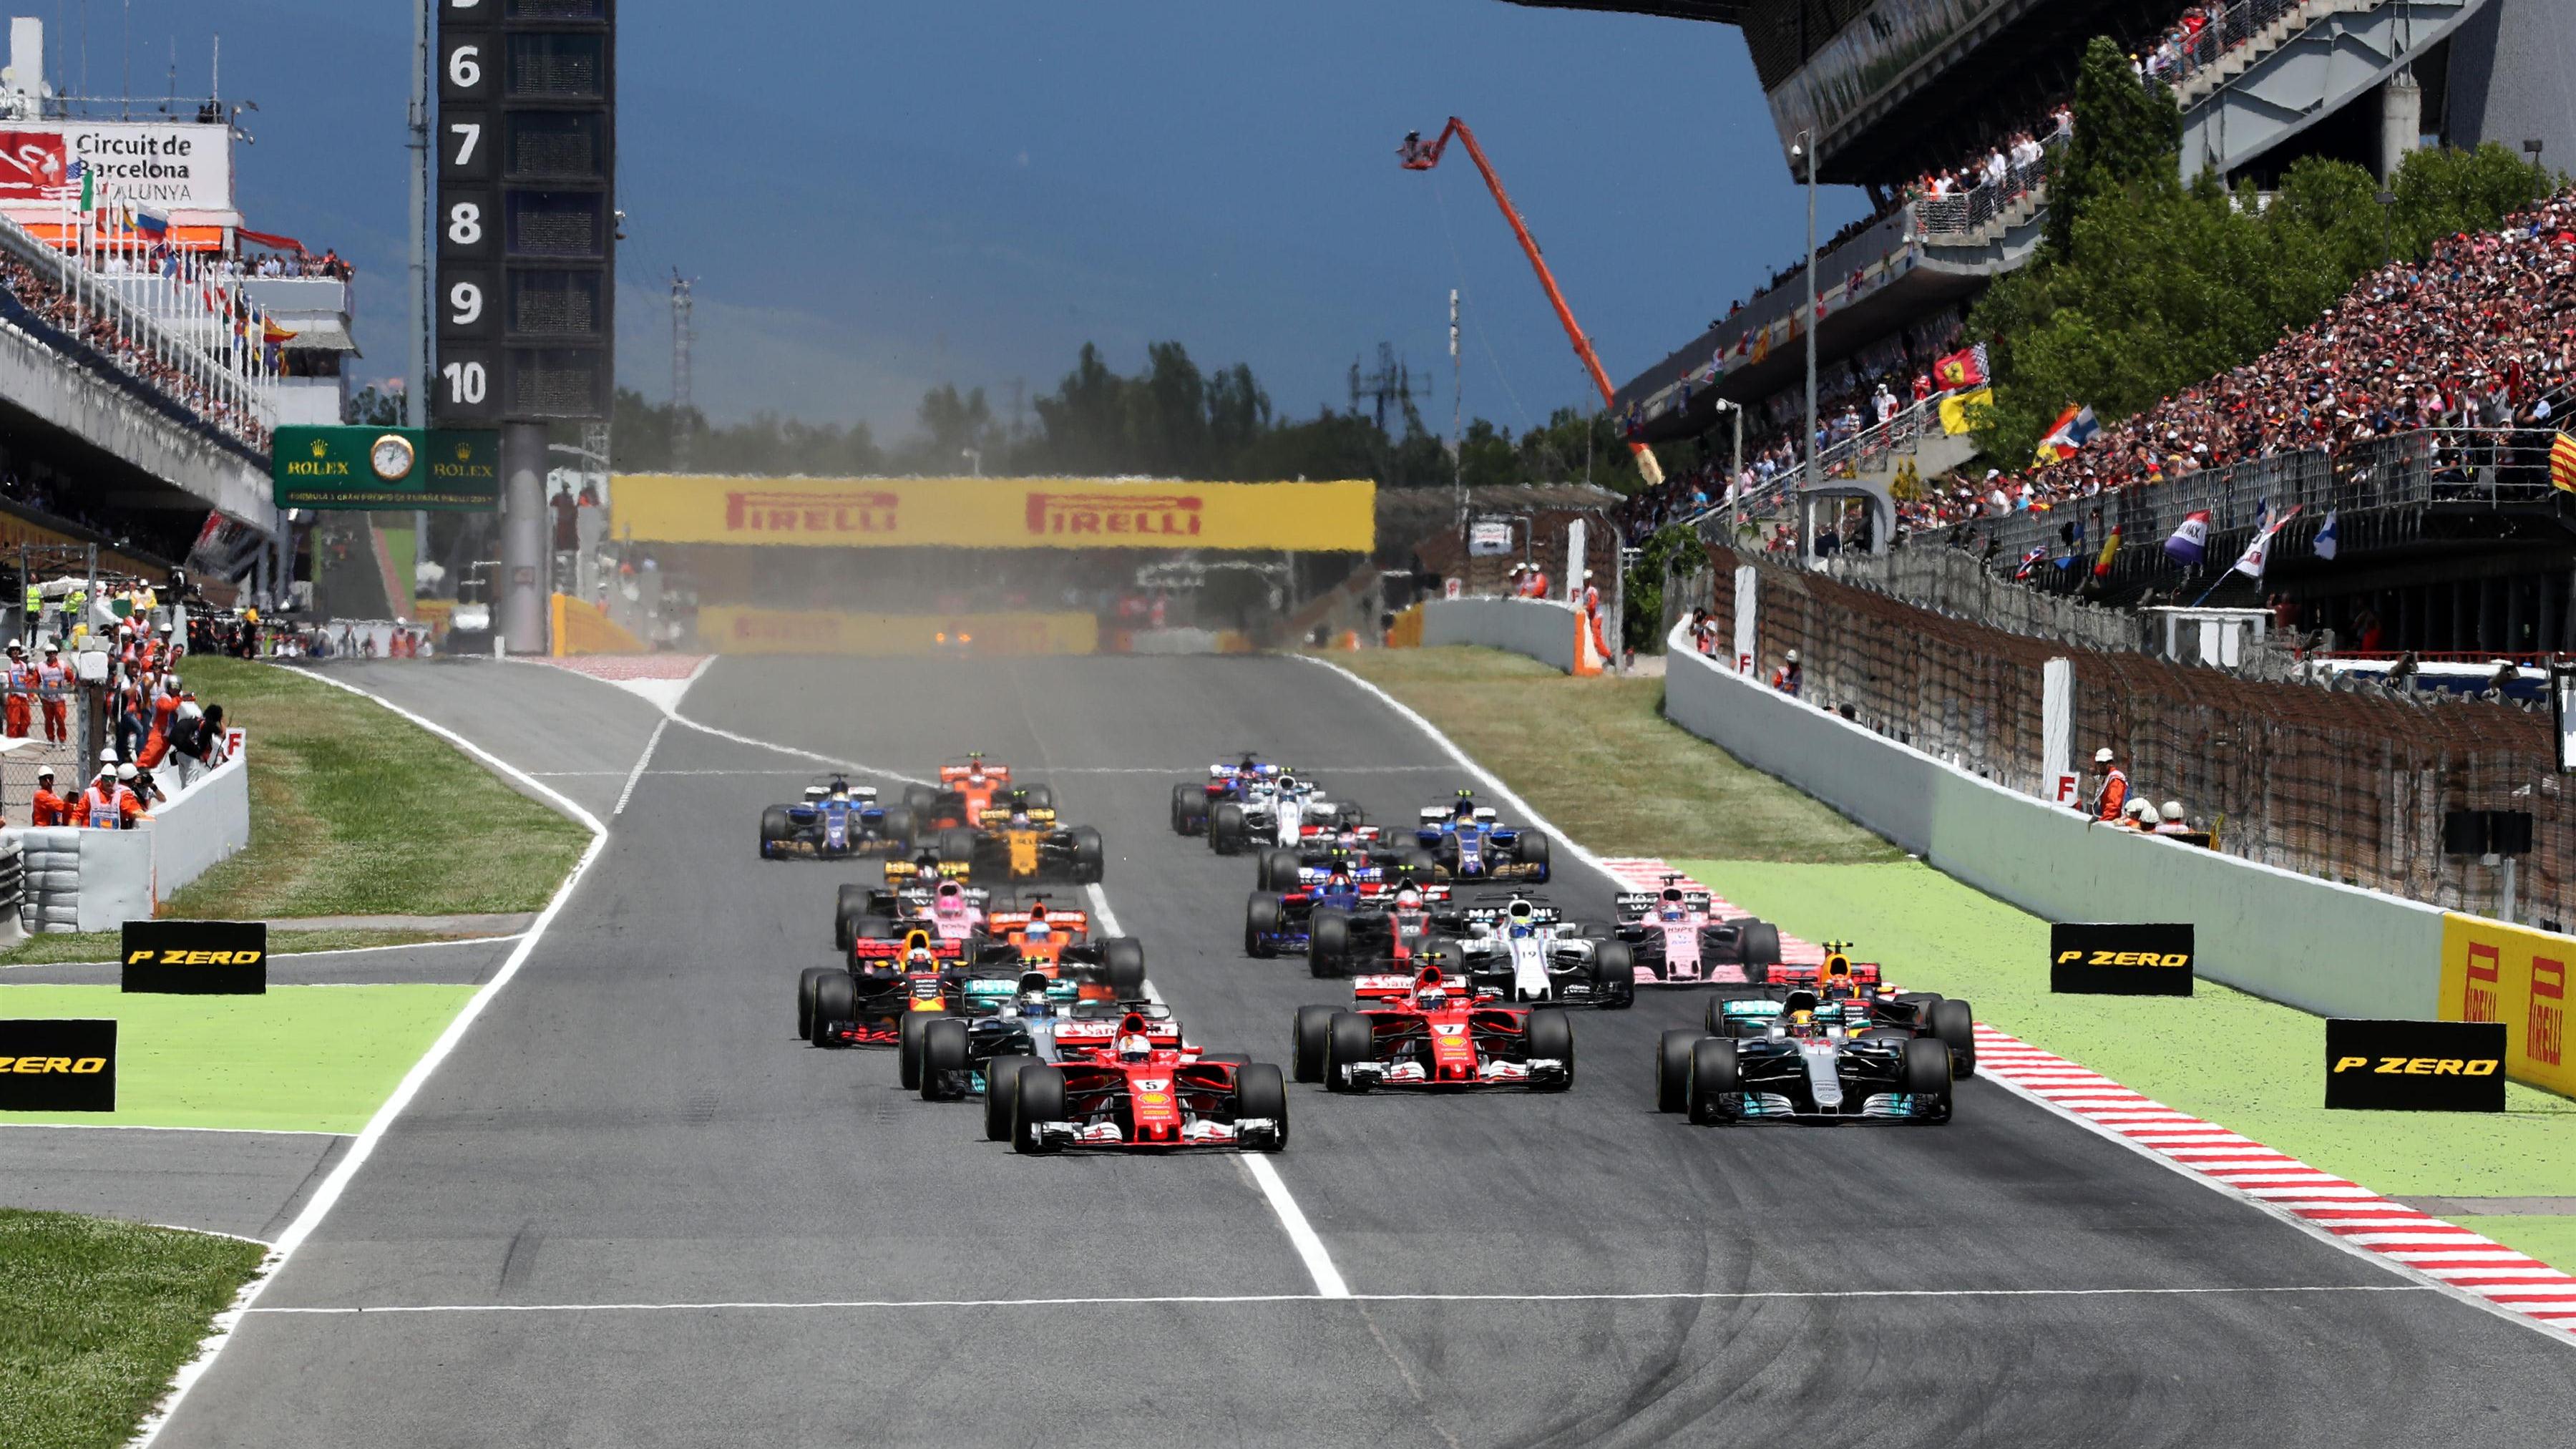 Movistar+ to screen F1 in Spain until 2020